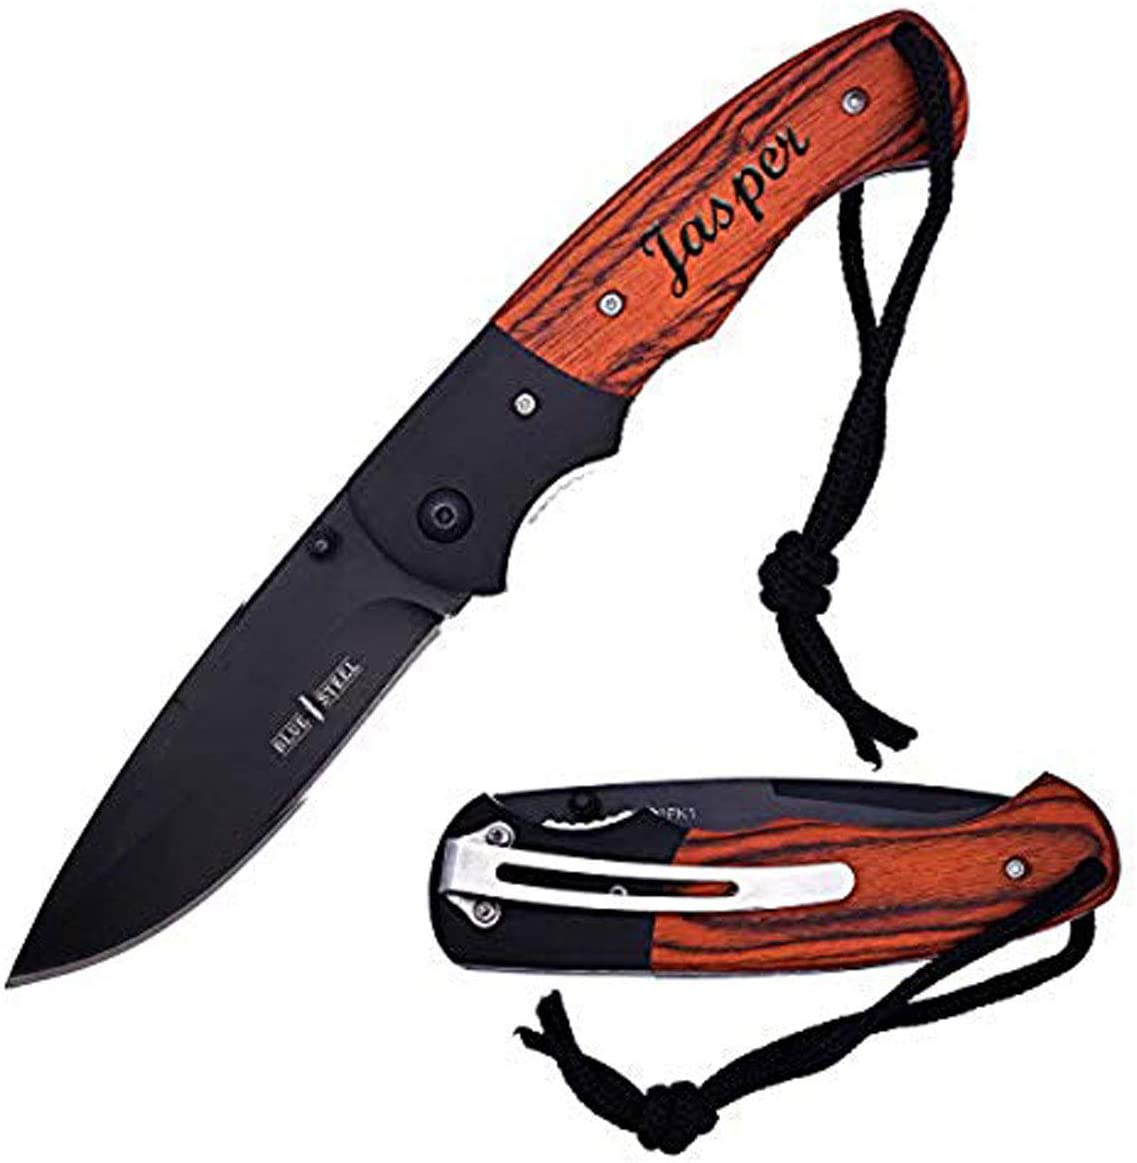 GIFTS INFINITY 8" Overall Folding Pocket Knife Stainless Steel Blade Wood Handle Birthday Gifts Unique Gifts for Men Christmas